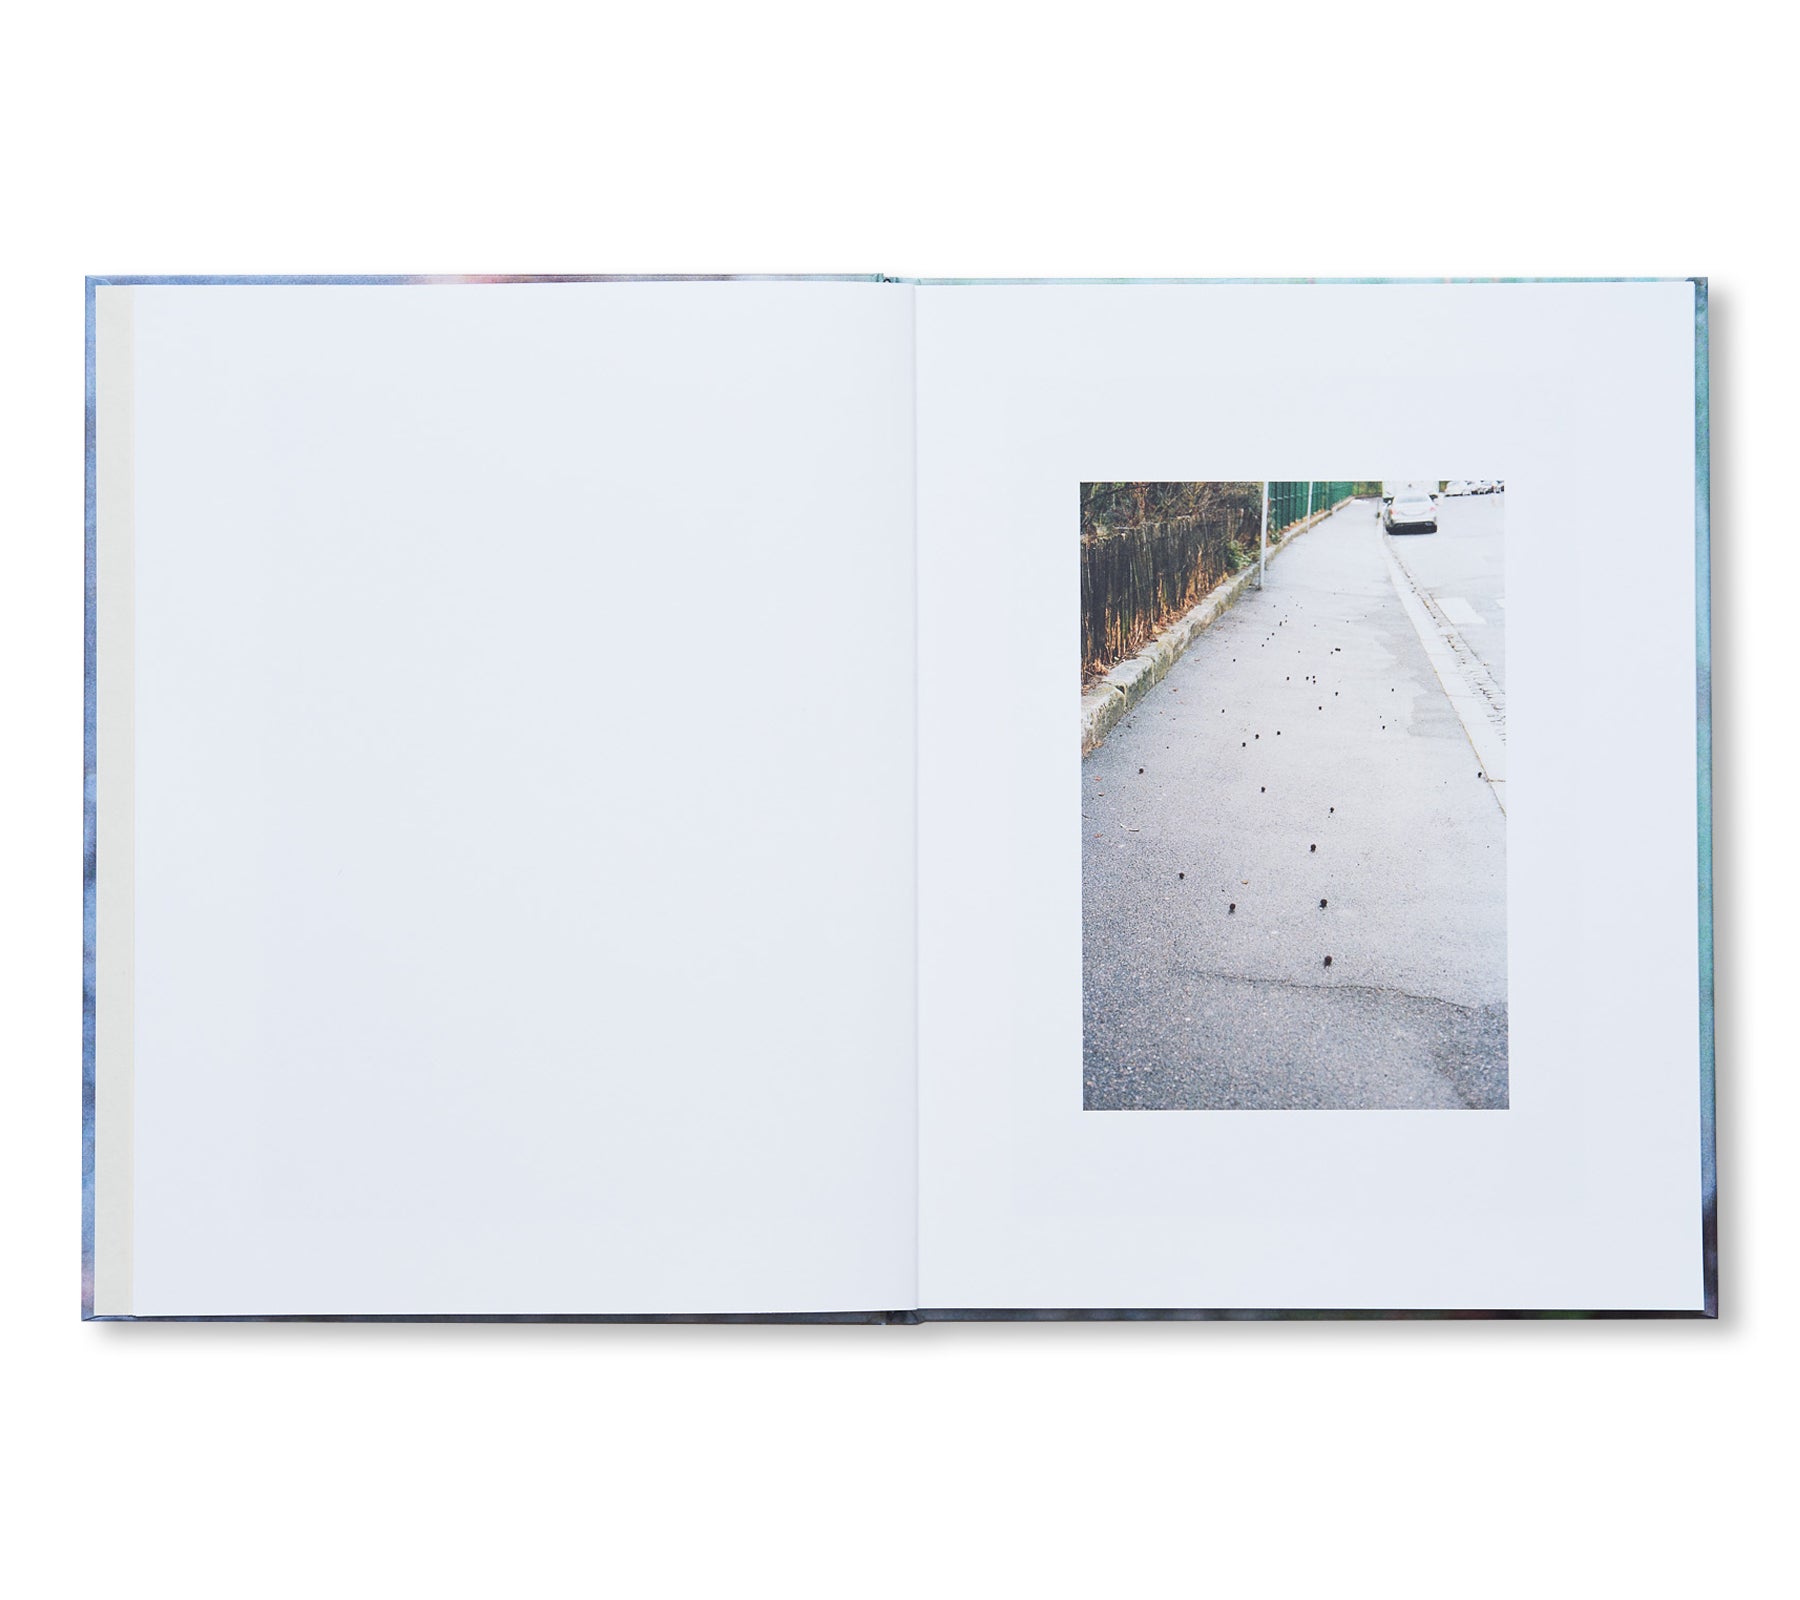 NOTES ON ORDINARY SPACES by Ola Rindal